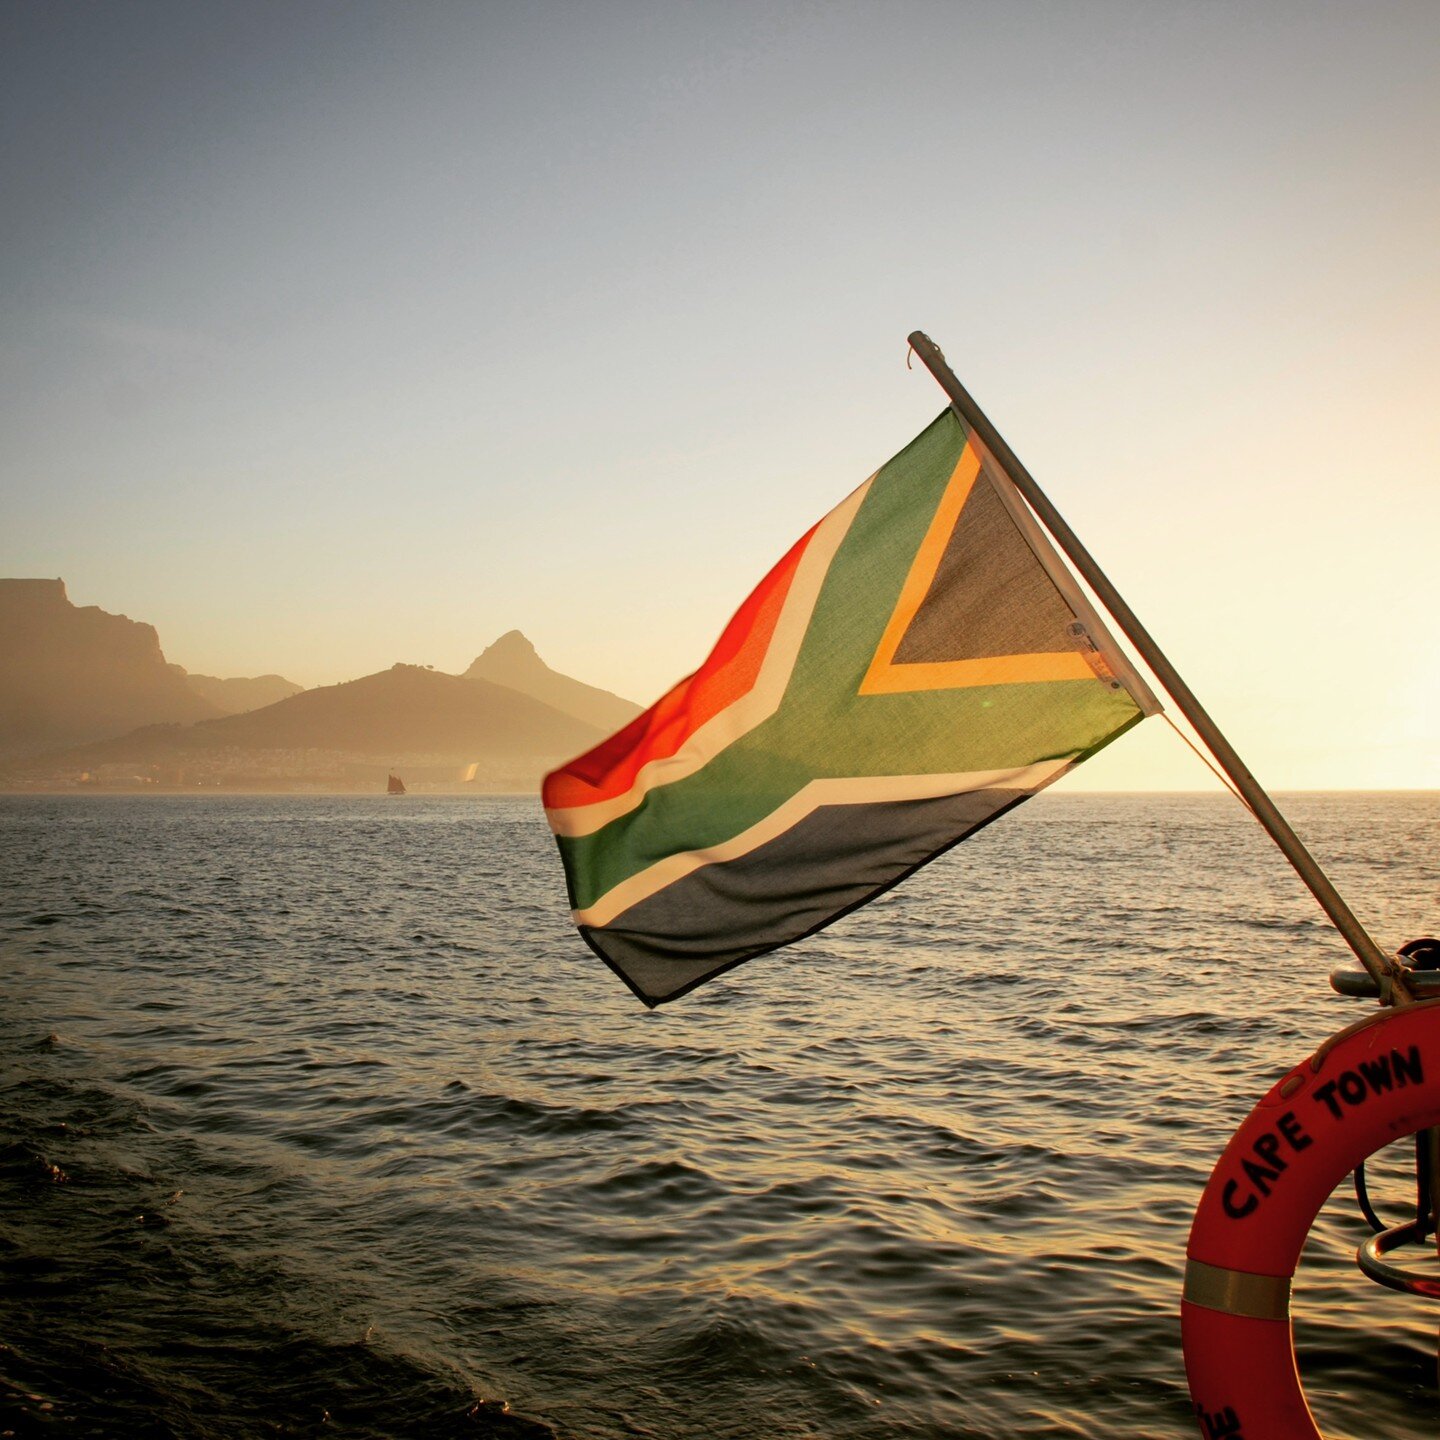 Savour the beauty of South Africa and hold onto the weekend's tranquility as you sail into a new week ahead 🇿🇦⛵️🏔️ Embrace the journey with SLOW. 

Share your favourite weekend moments with us using #MySLOWWeekend, and let's keep the good vibes go